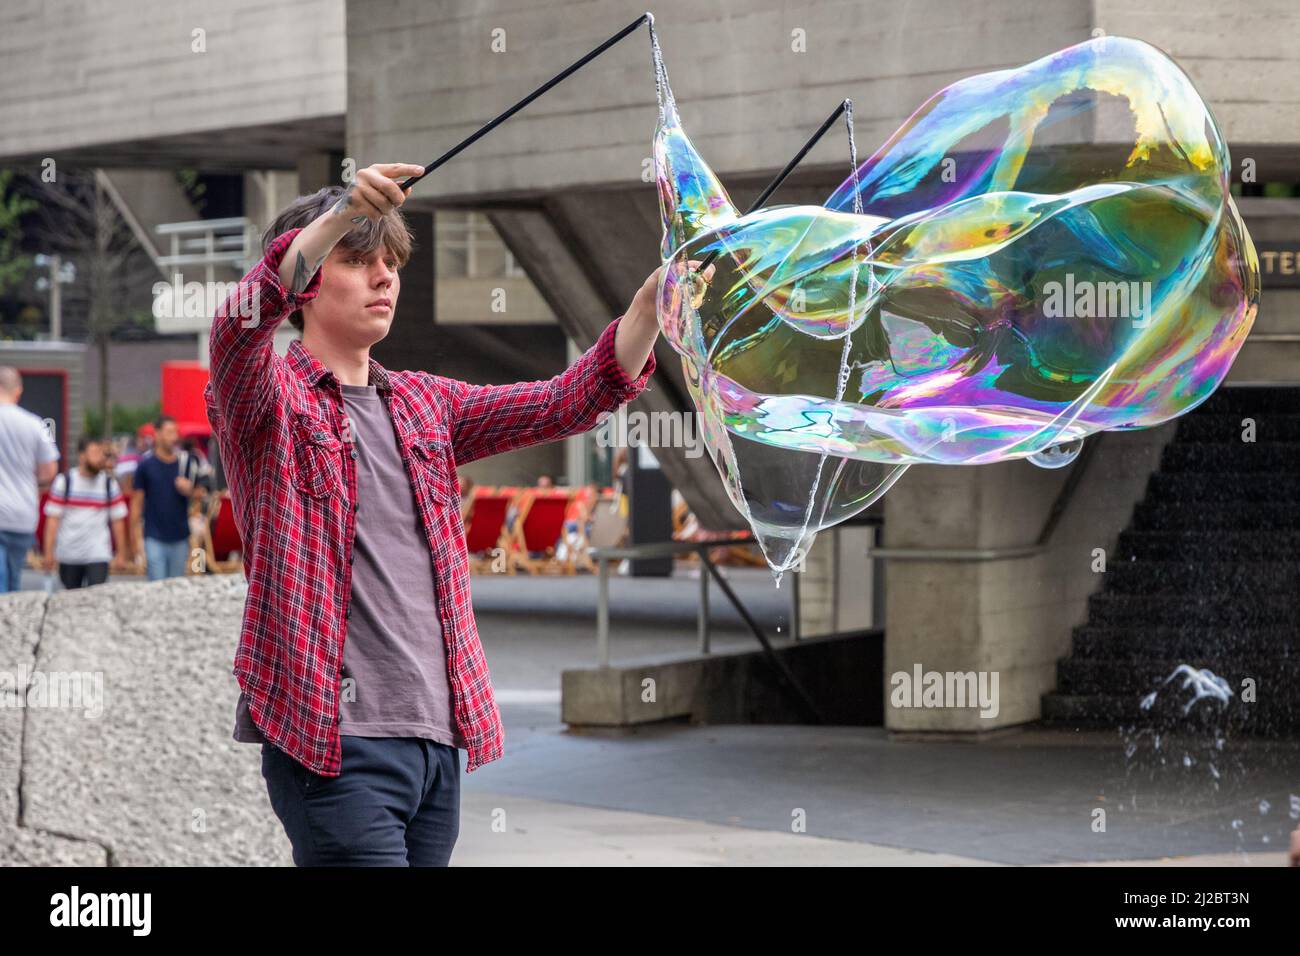 London, UK - 19 July, 2021 - A soap bubble street performer in South Bank area Stock Photo